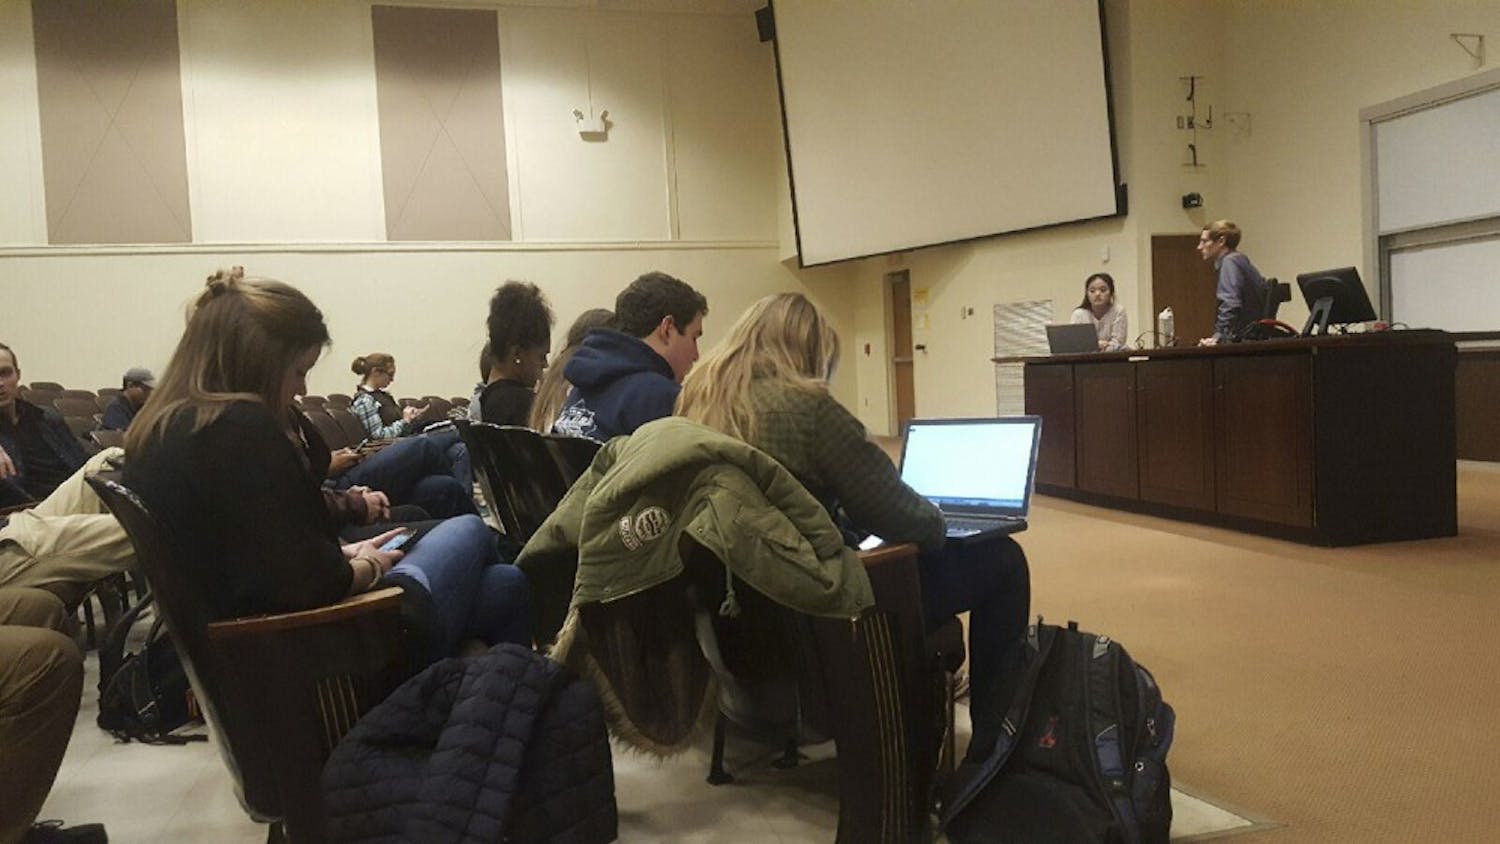 A meeting was held in Carroll Hall on Jan. 30 for students to announce their intent to run for student body president.